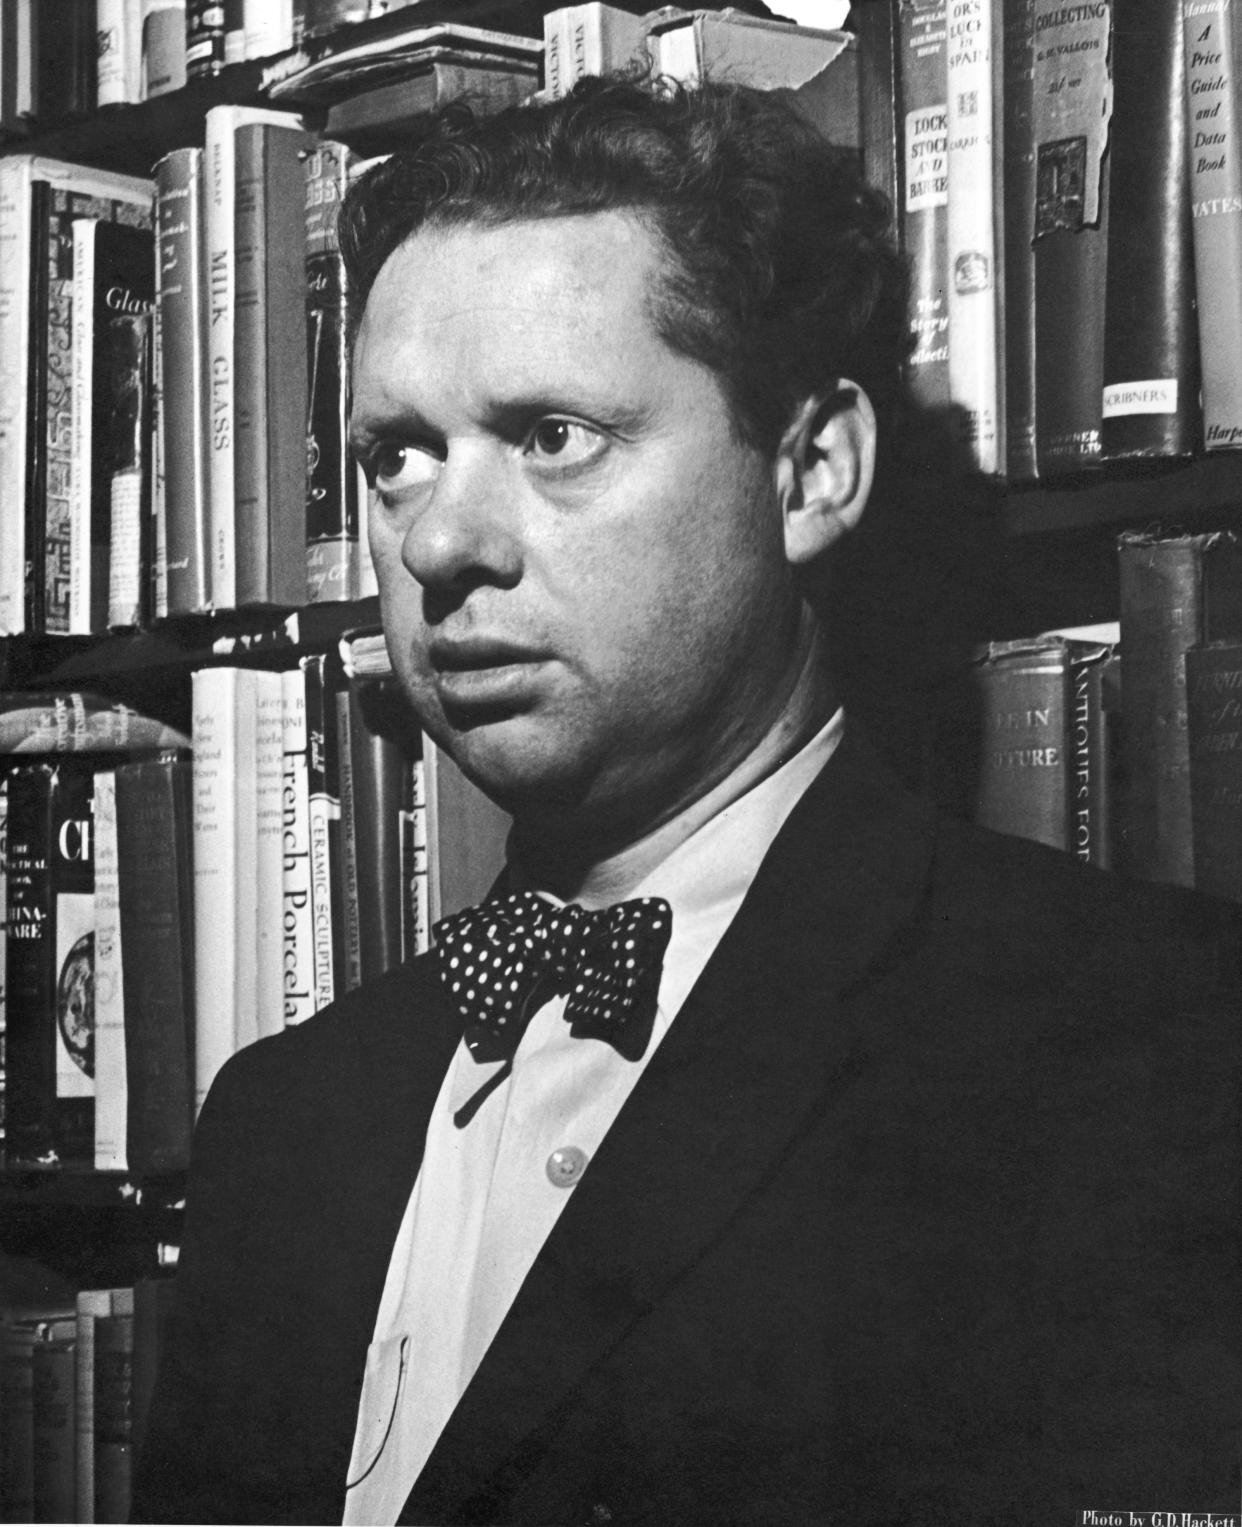 Welsh poet Dylan Thomas (1914 - 1953) stands in front of shelves of books at the Gotham Book Shop during a reception held in his honor, New York City, 1st May 1952. (Photo by G.D. Hackett/Getty Images)